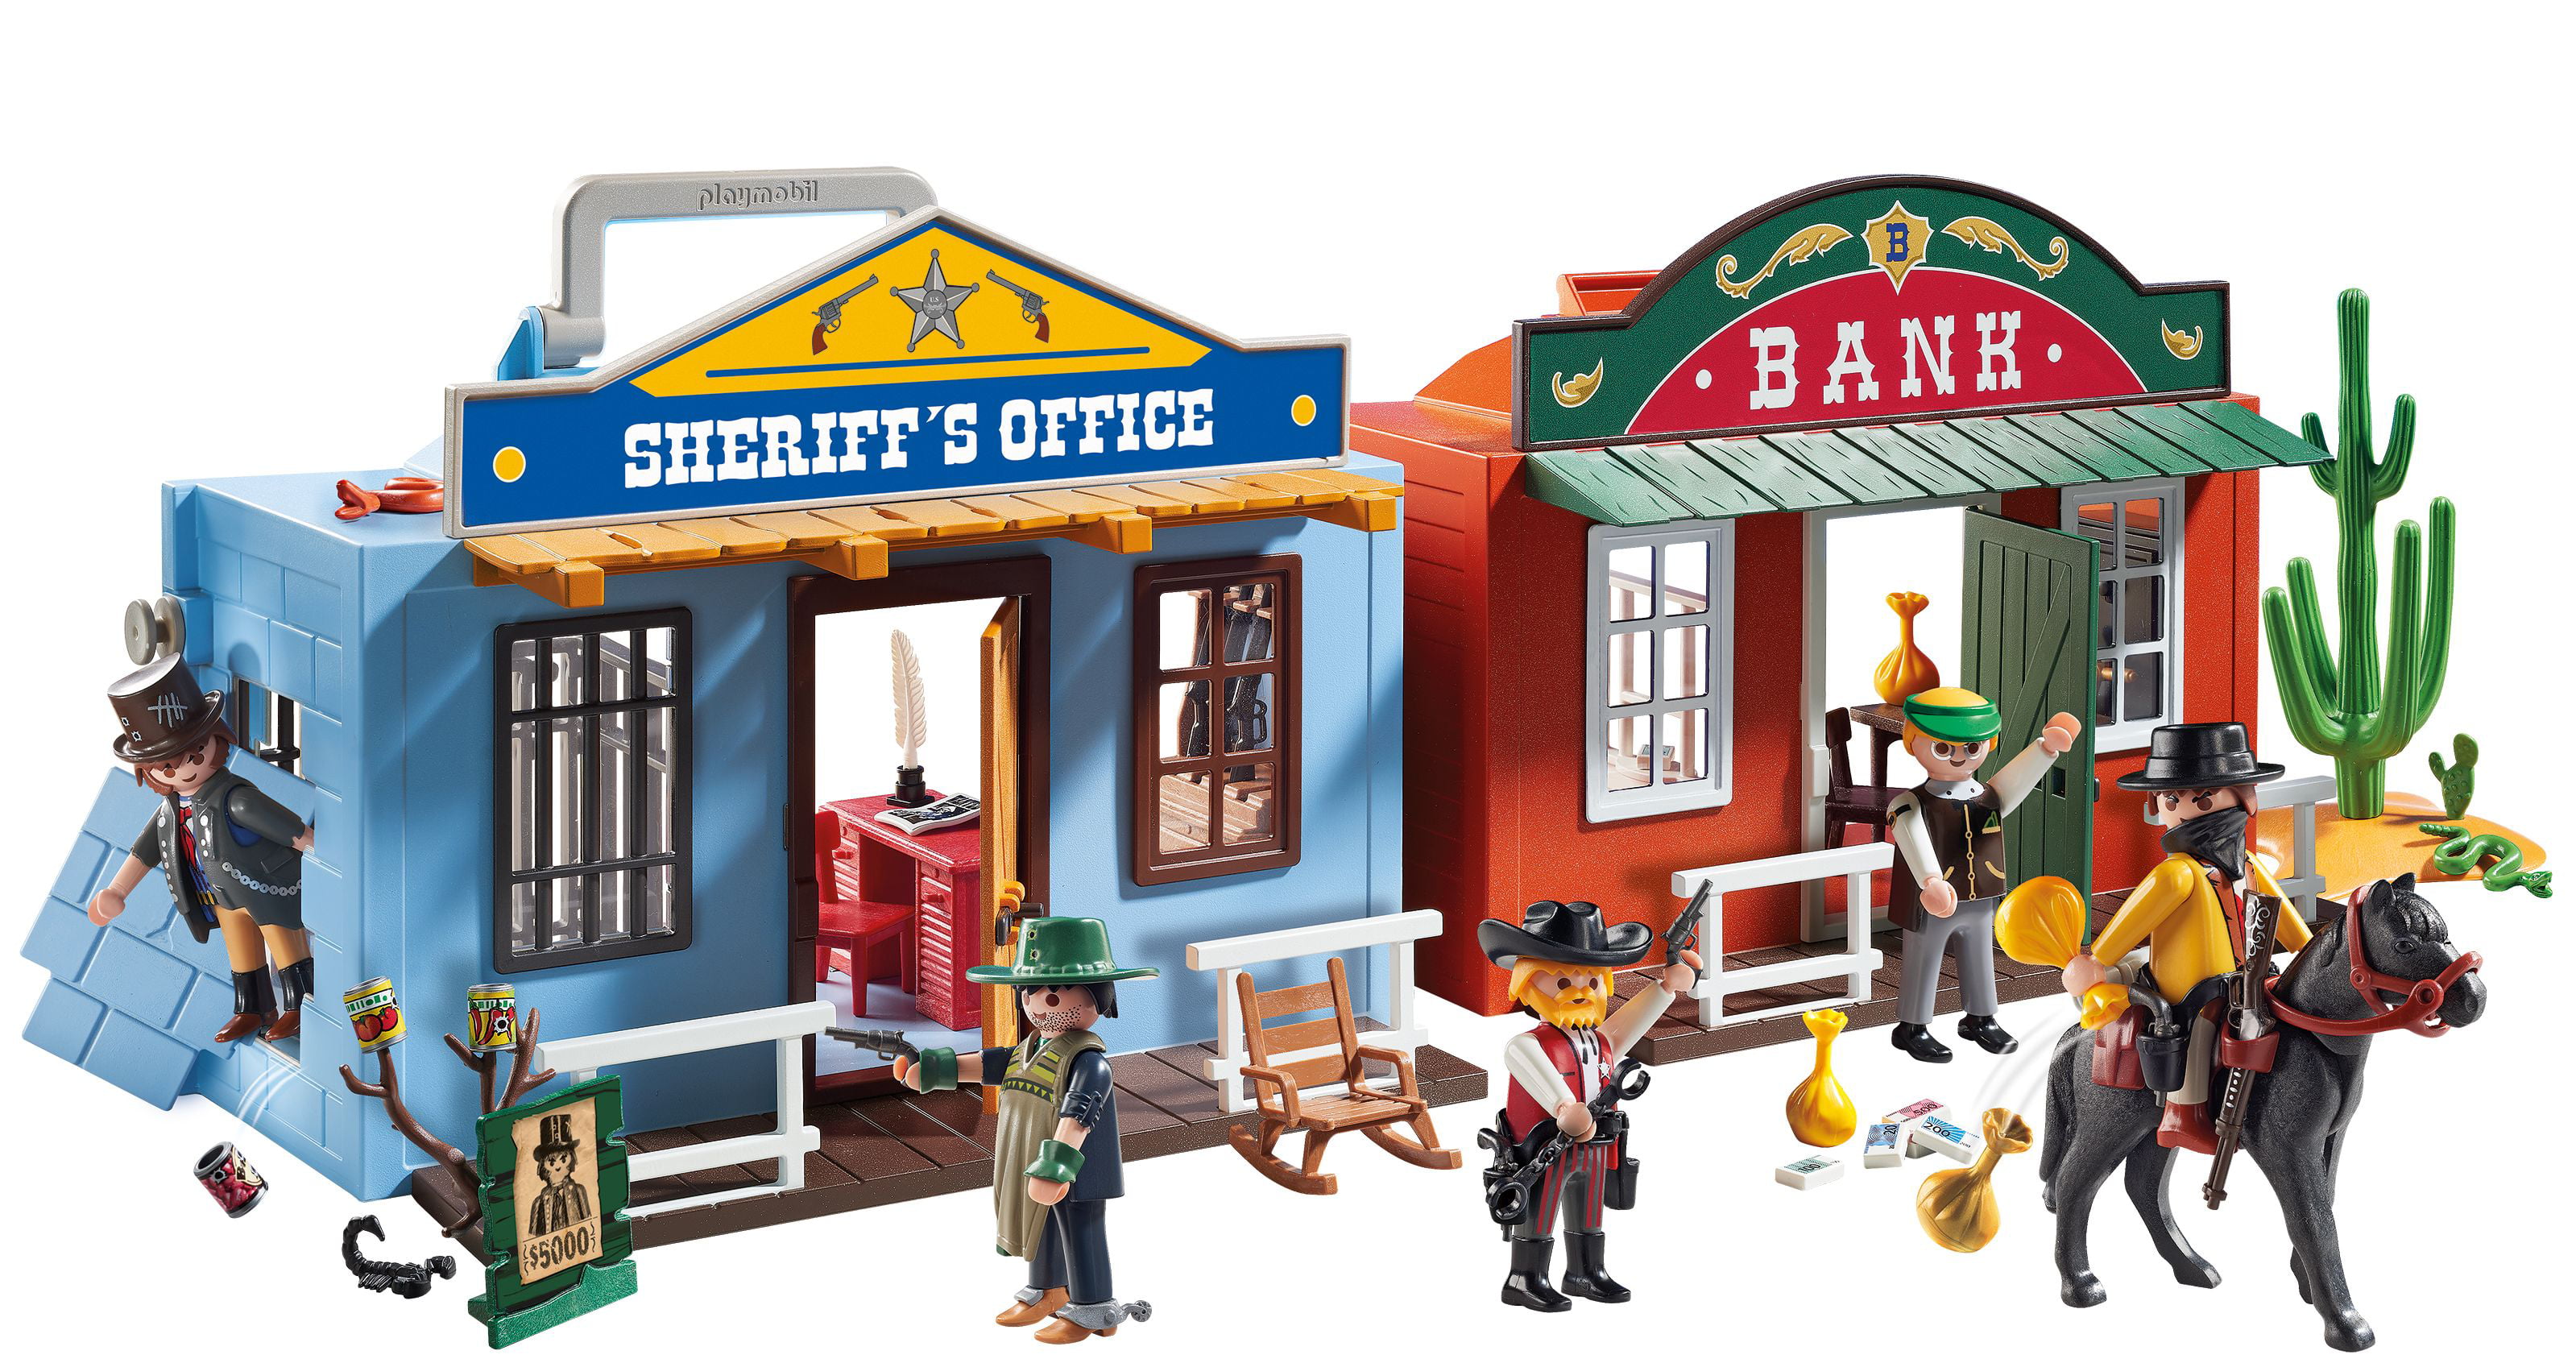 Compliment Prominent Collapse PLAYMOBIL Take Along Western City - Walmart.com